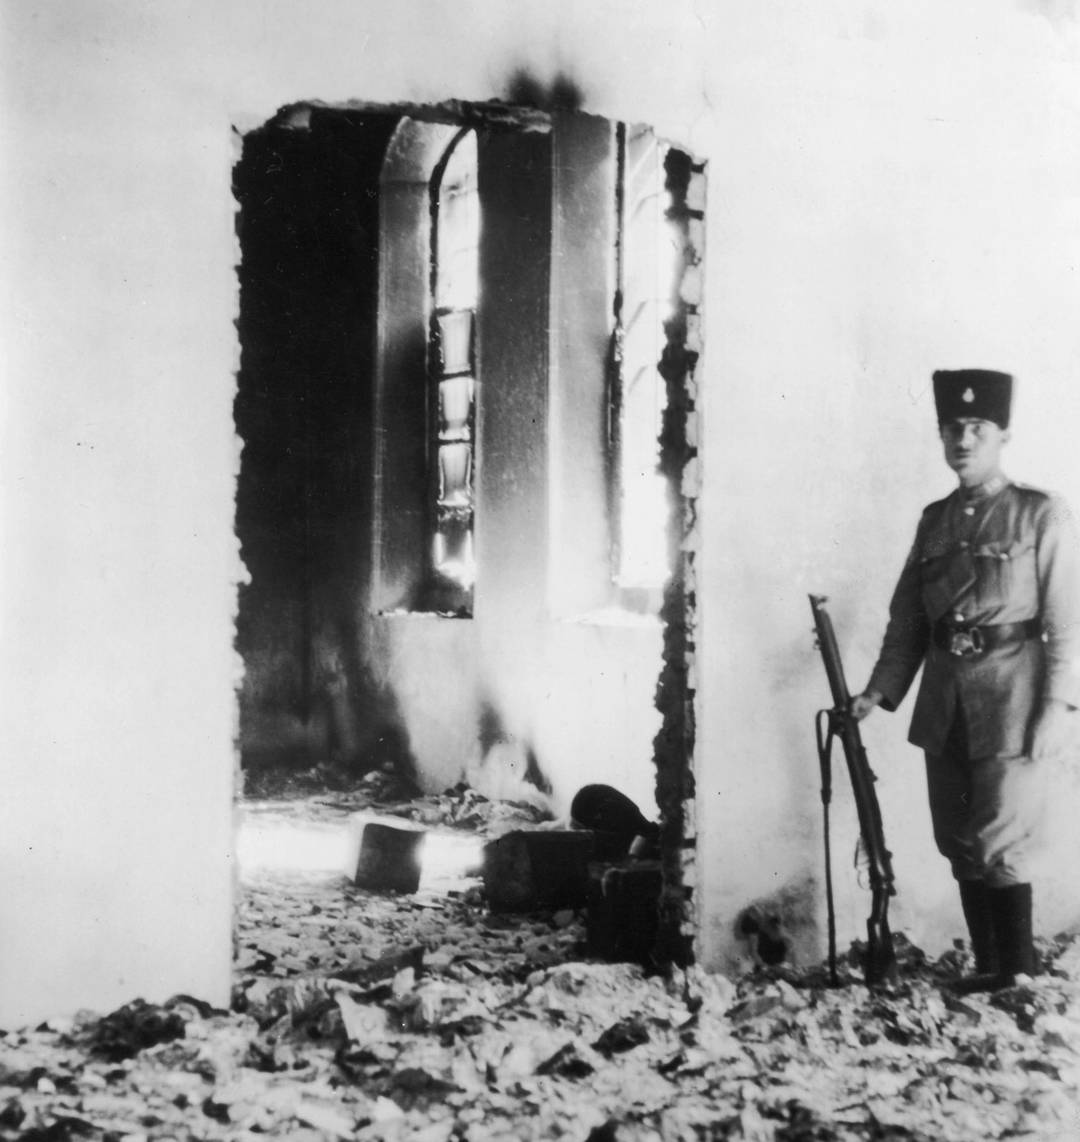 A soldier standing guard in the ruins of a Jewish hospital in Hebron after it was pillaged by Arabs, August 1929. Sixty-seven unarmed Jewish men, women, and children were murdered that day.